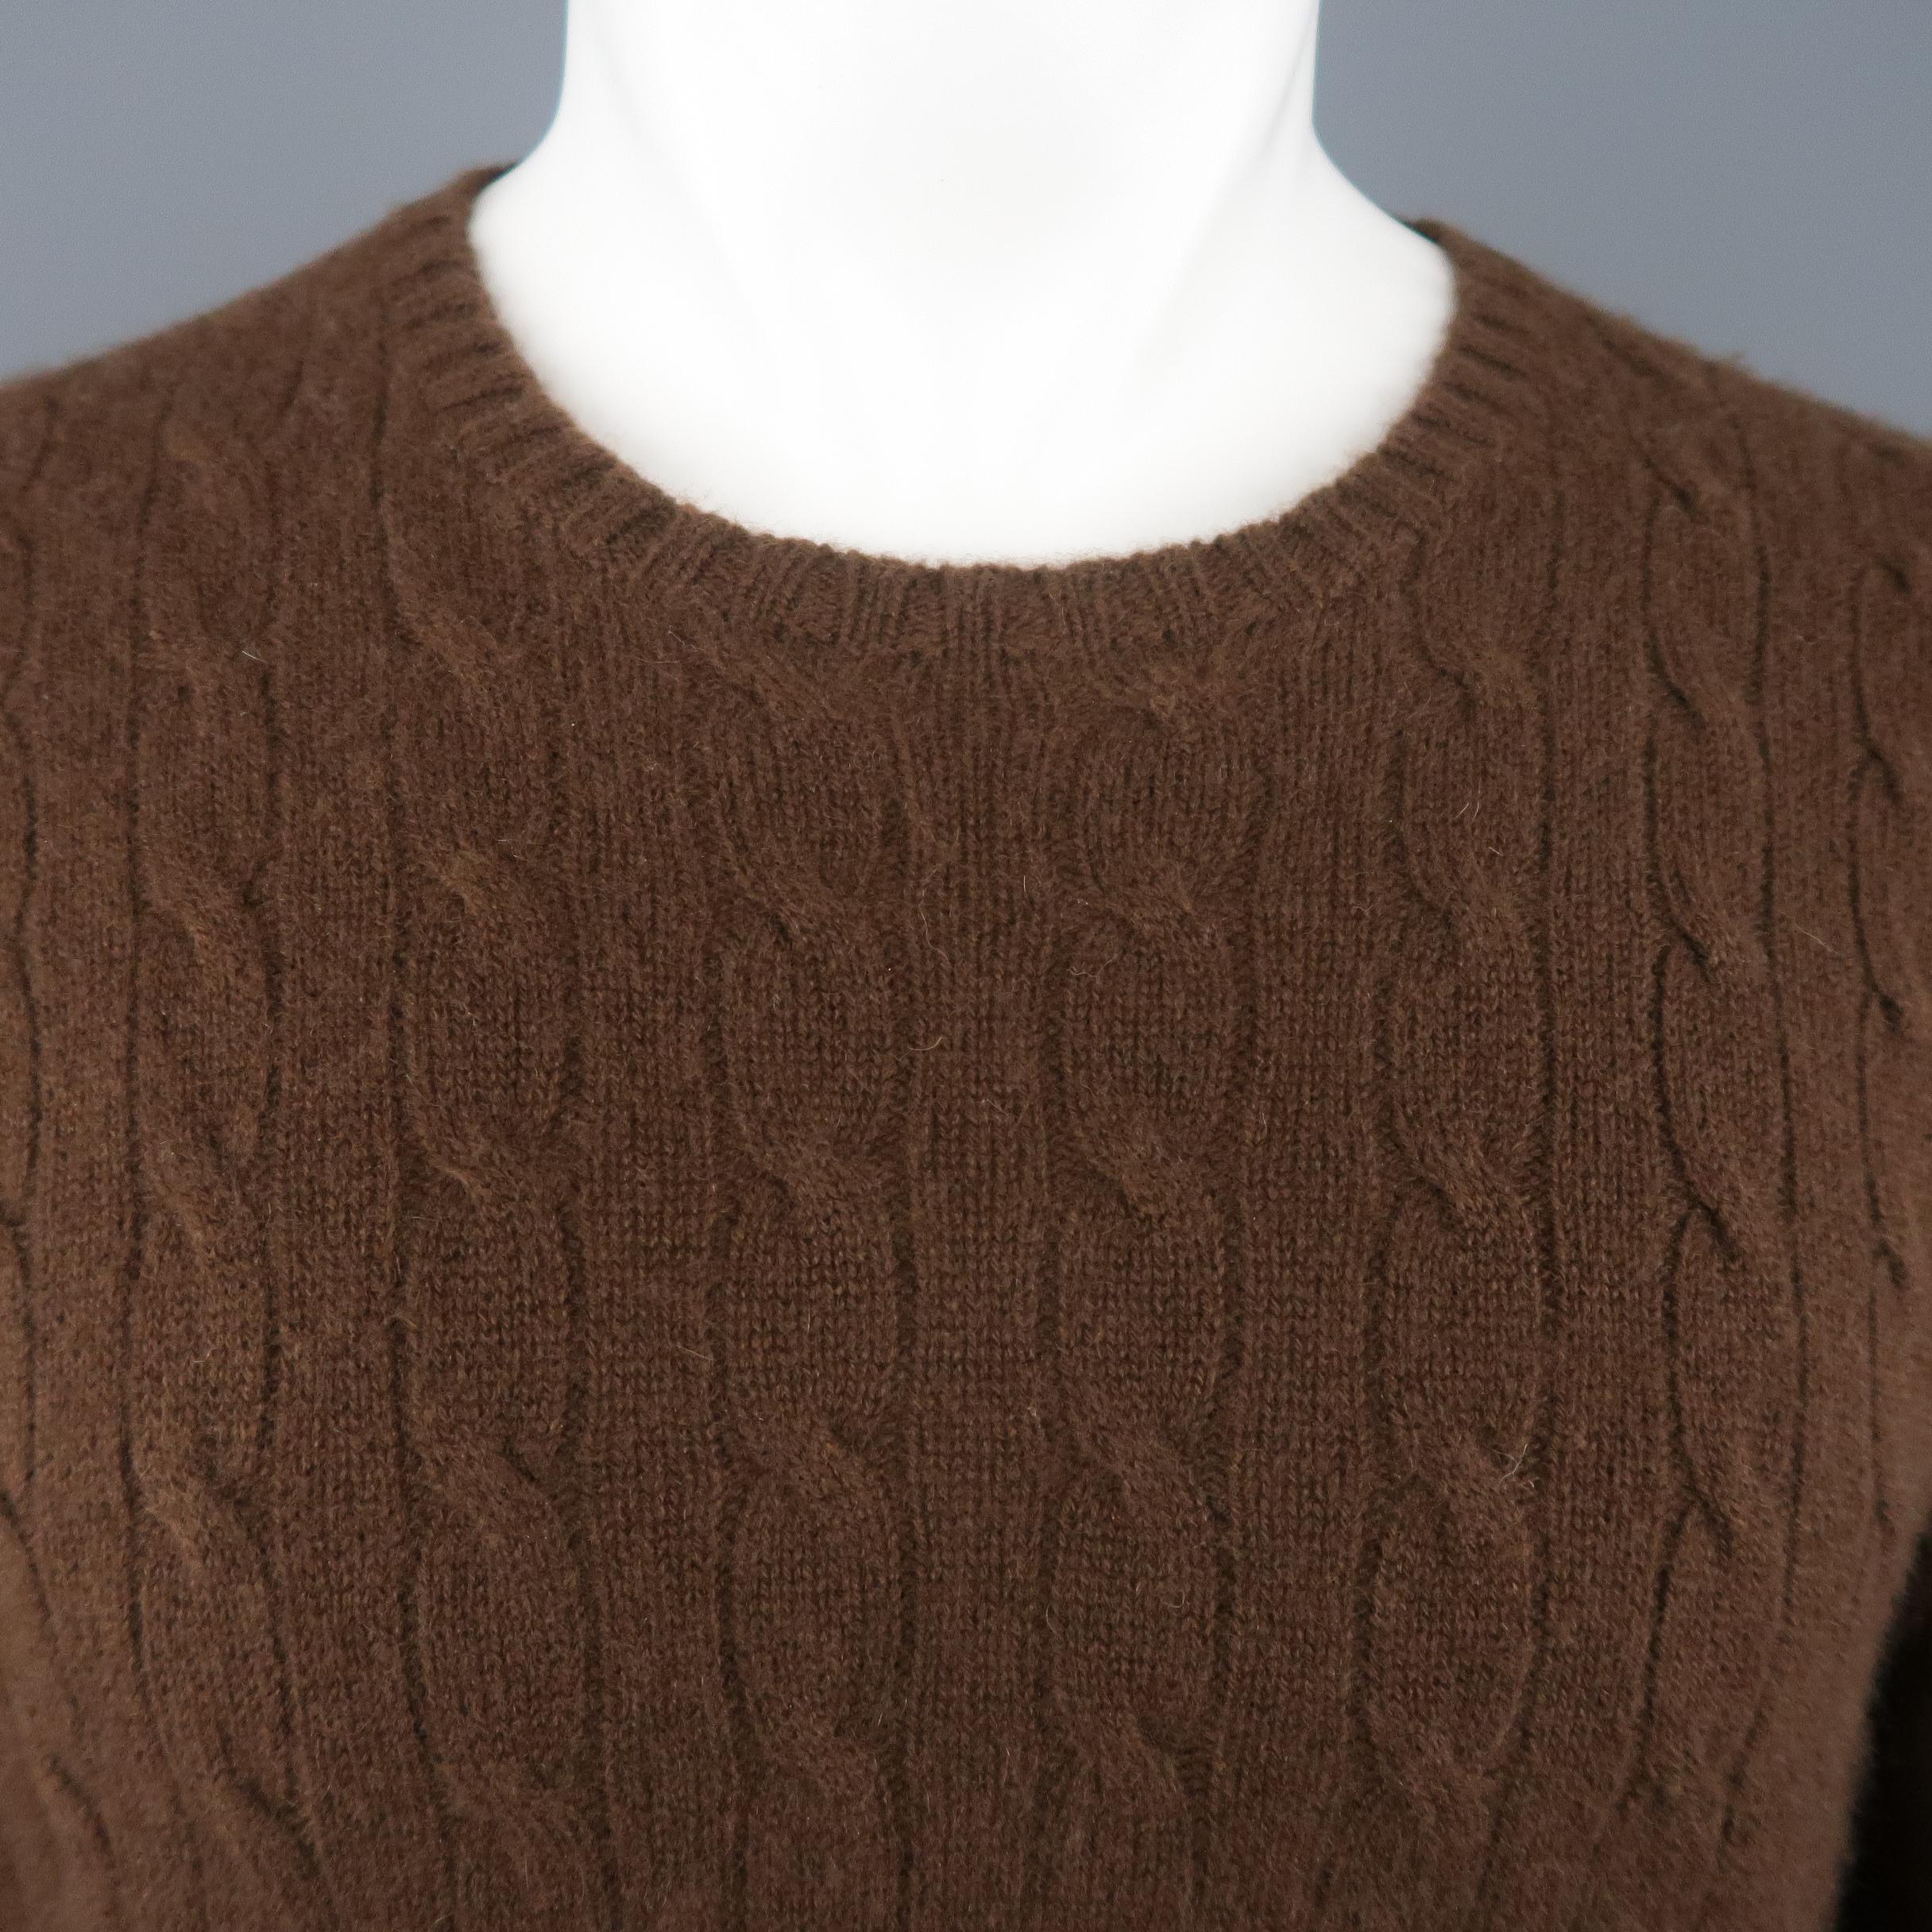 POLO RALPH LAUREN pullover sweater comes in brown cashmere cable knit with a ribbed crewneck and cuffs.
 
Excellent Pre-Owned Condition.
Marked: M
 
Measurements:
 
Shoulder: 18 in.
Chest: 46 in.
Sleeve: 27 in.
Length: 27 in.